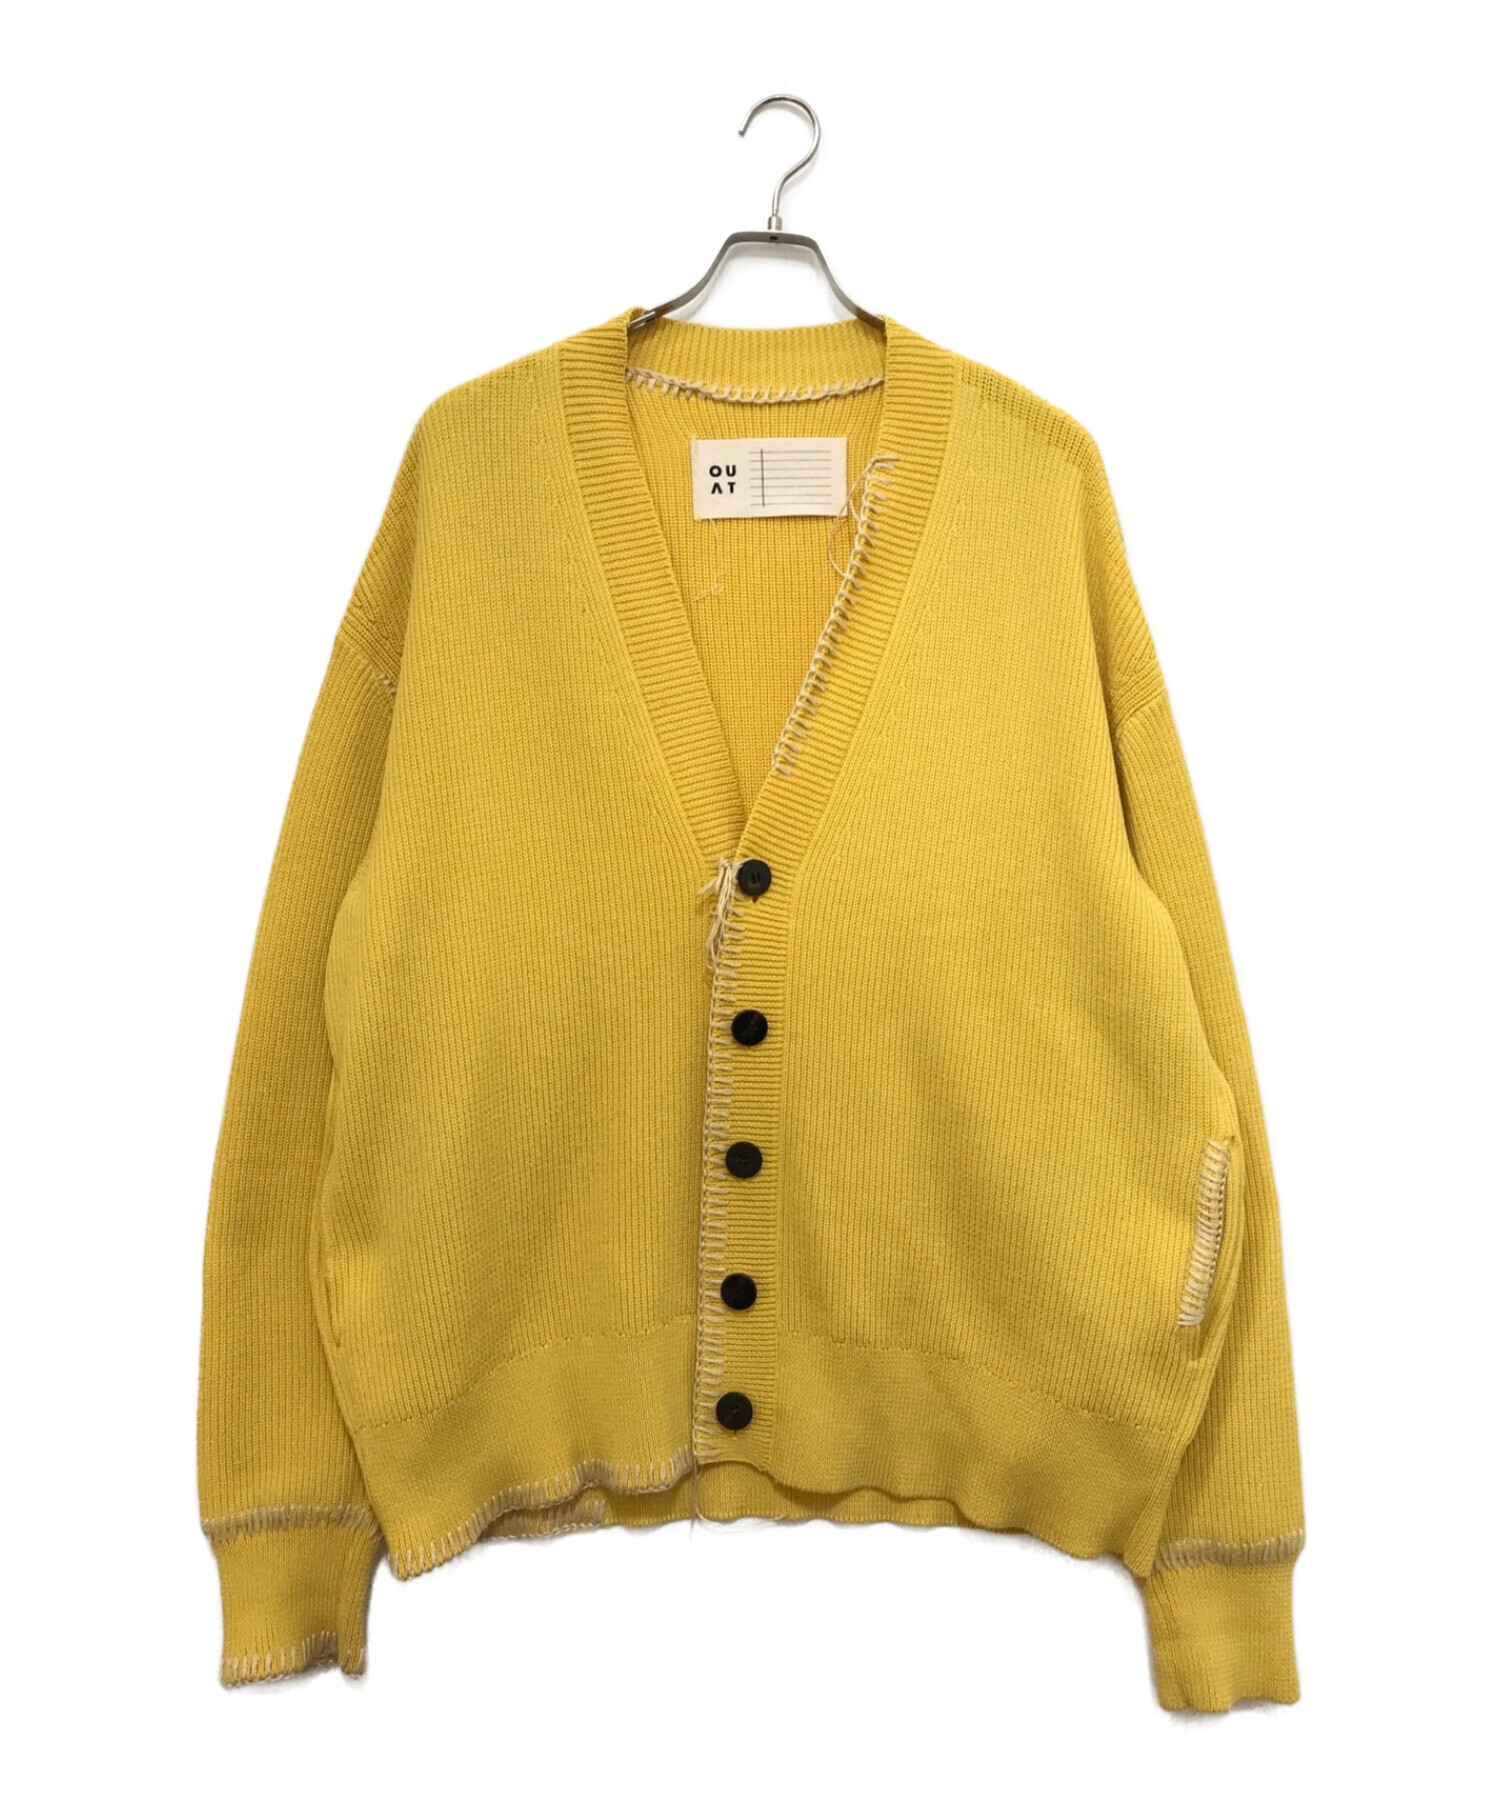 OUAT YELLOW OFFICE CARDIGAN